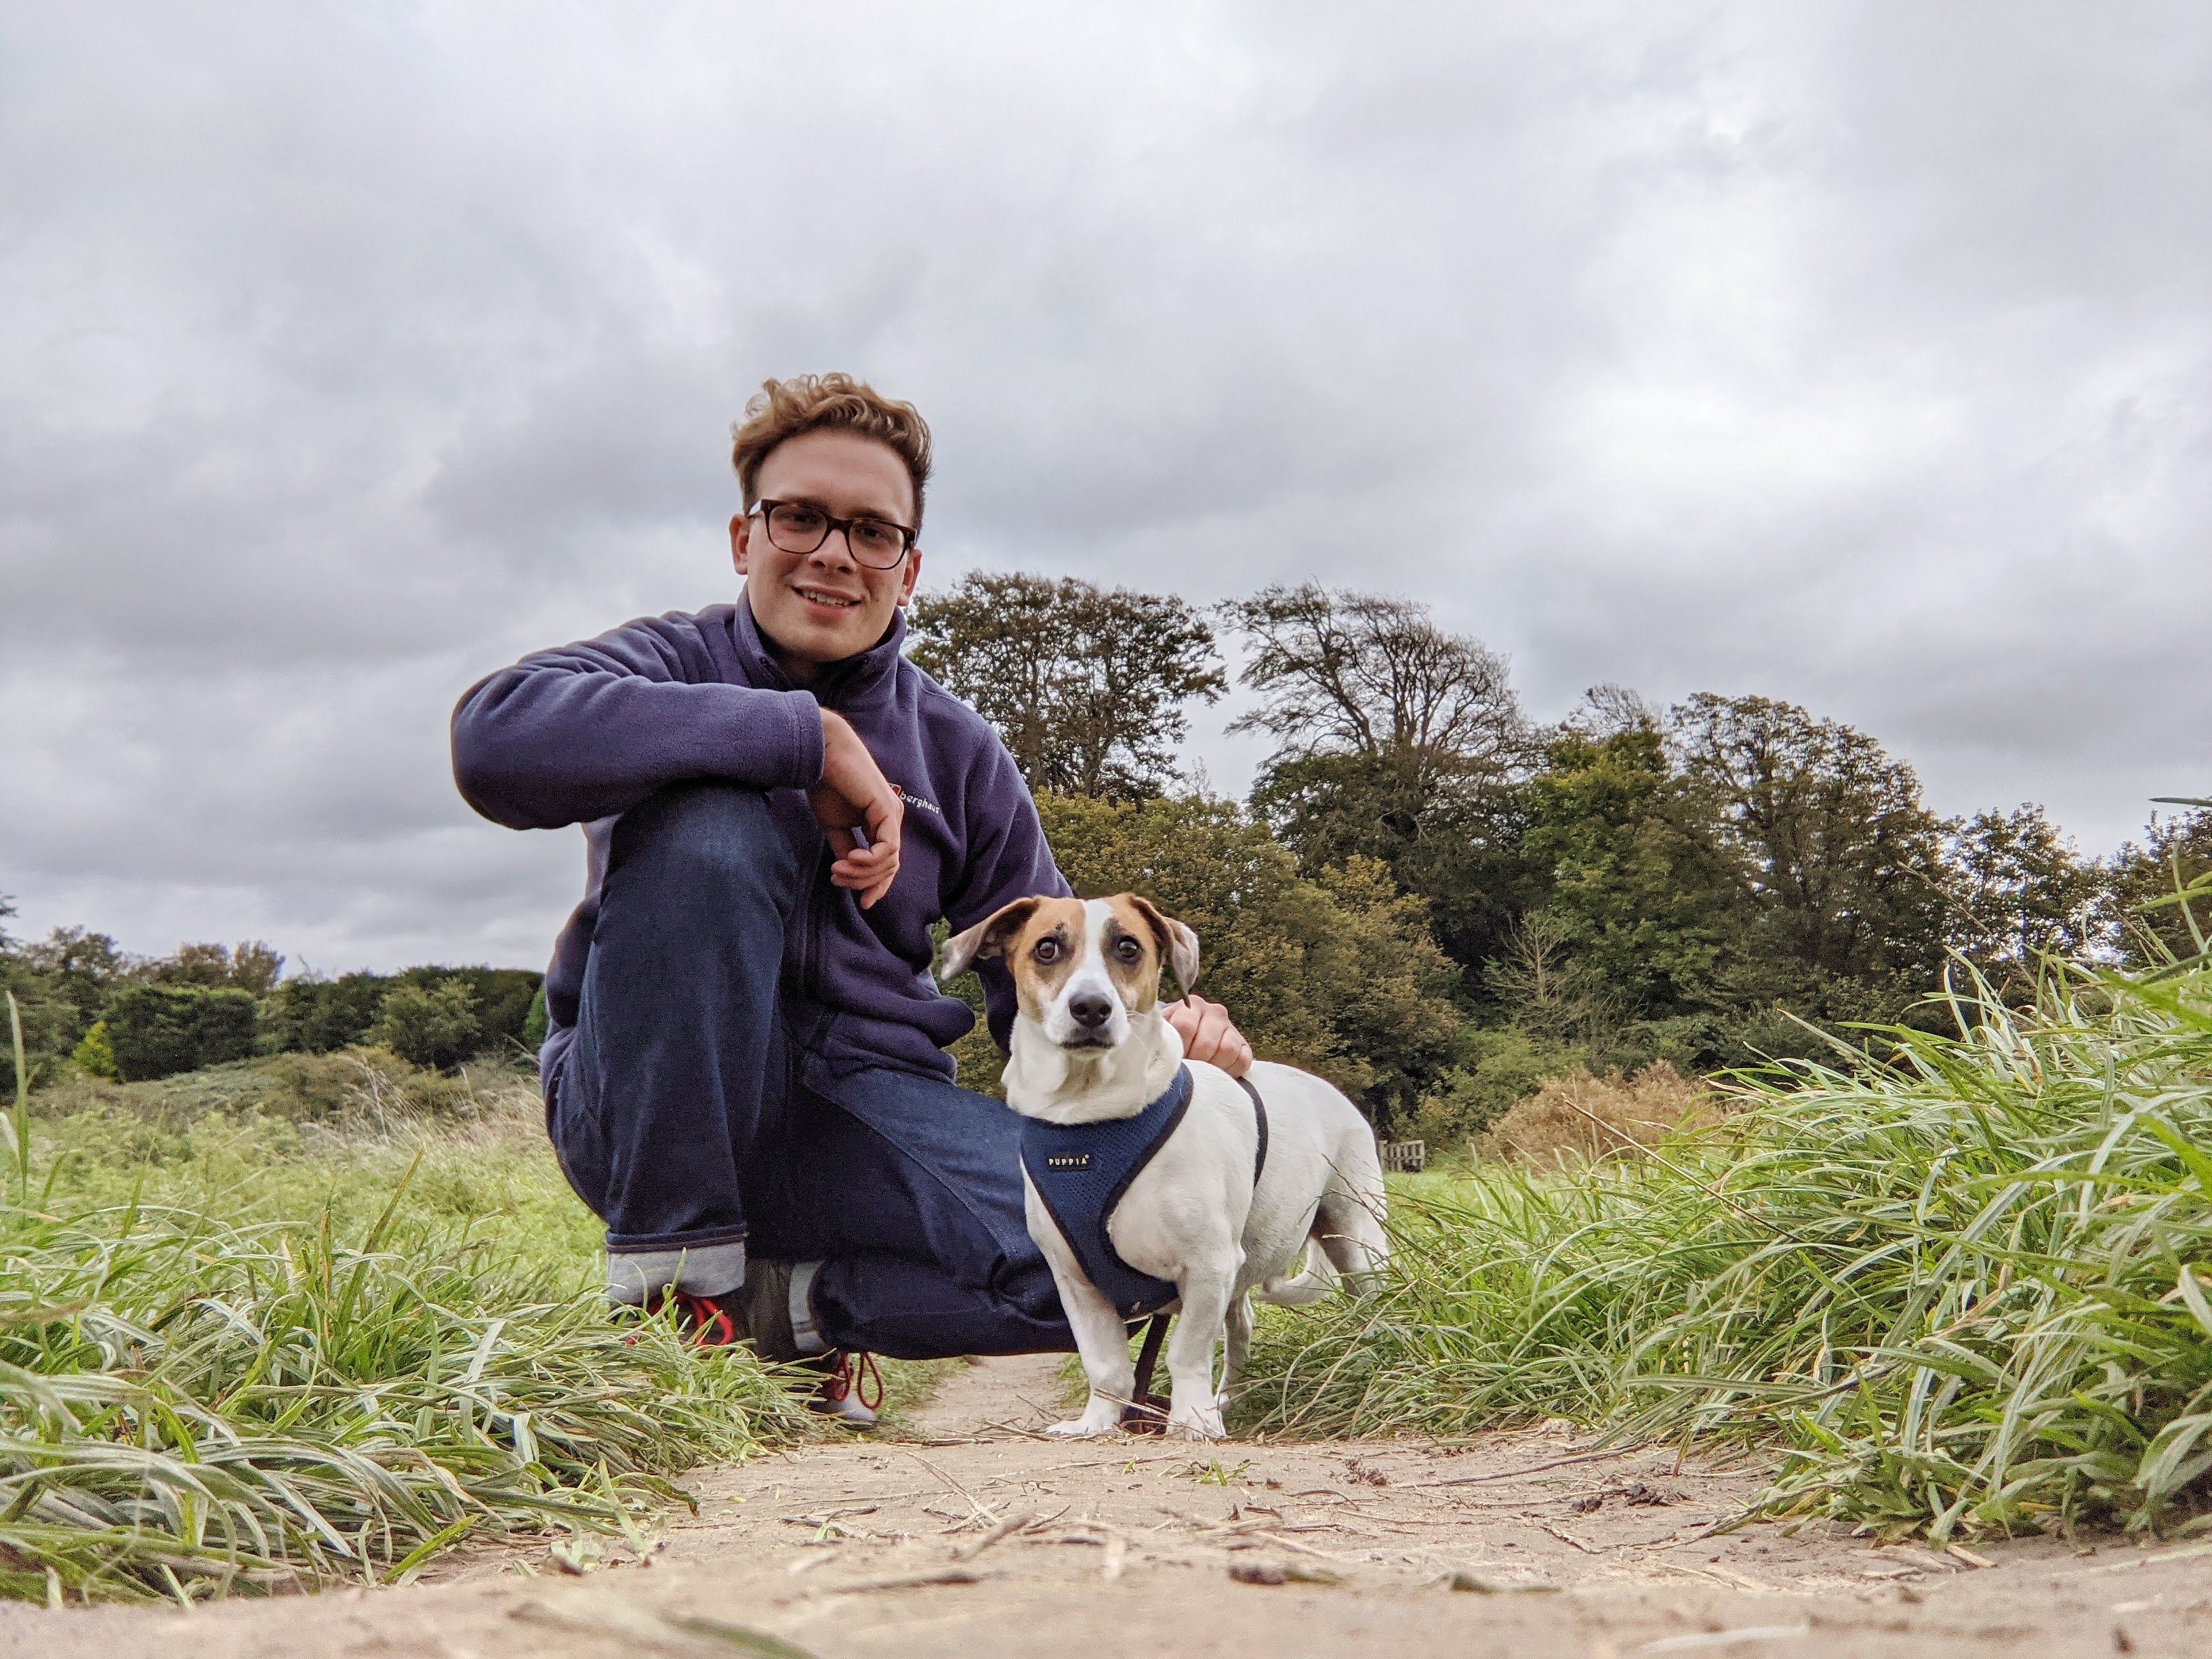 A photo of Dominic and Albie, his dog, on a walk with some woods behind them.